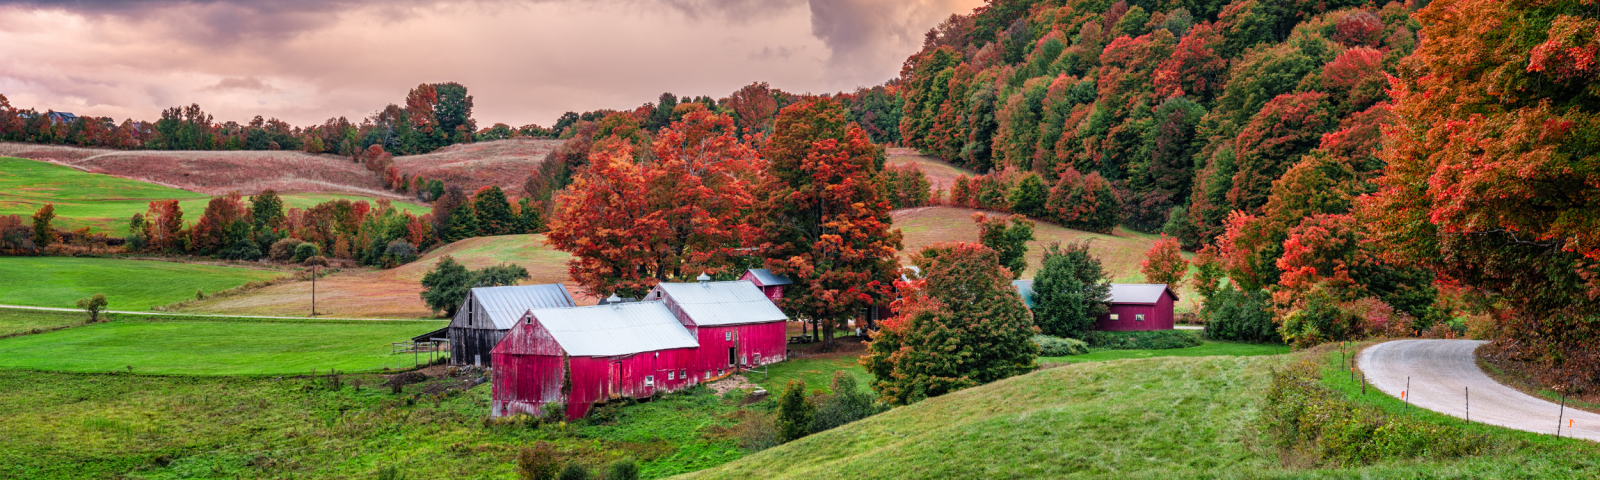 A rural scene in Vermont. A farm and a red barn in autumn.